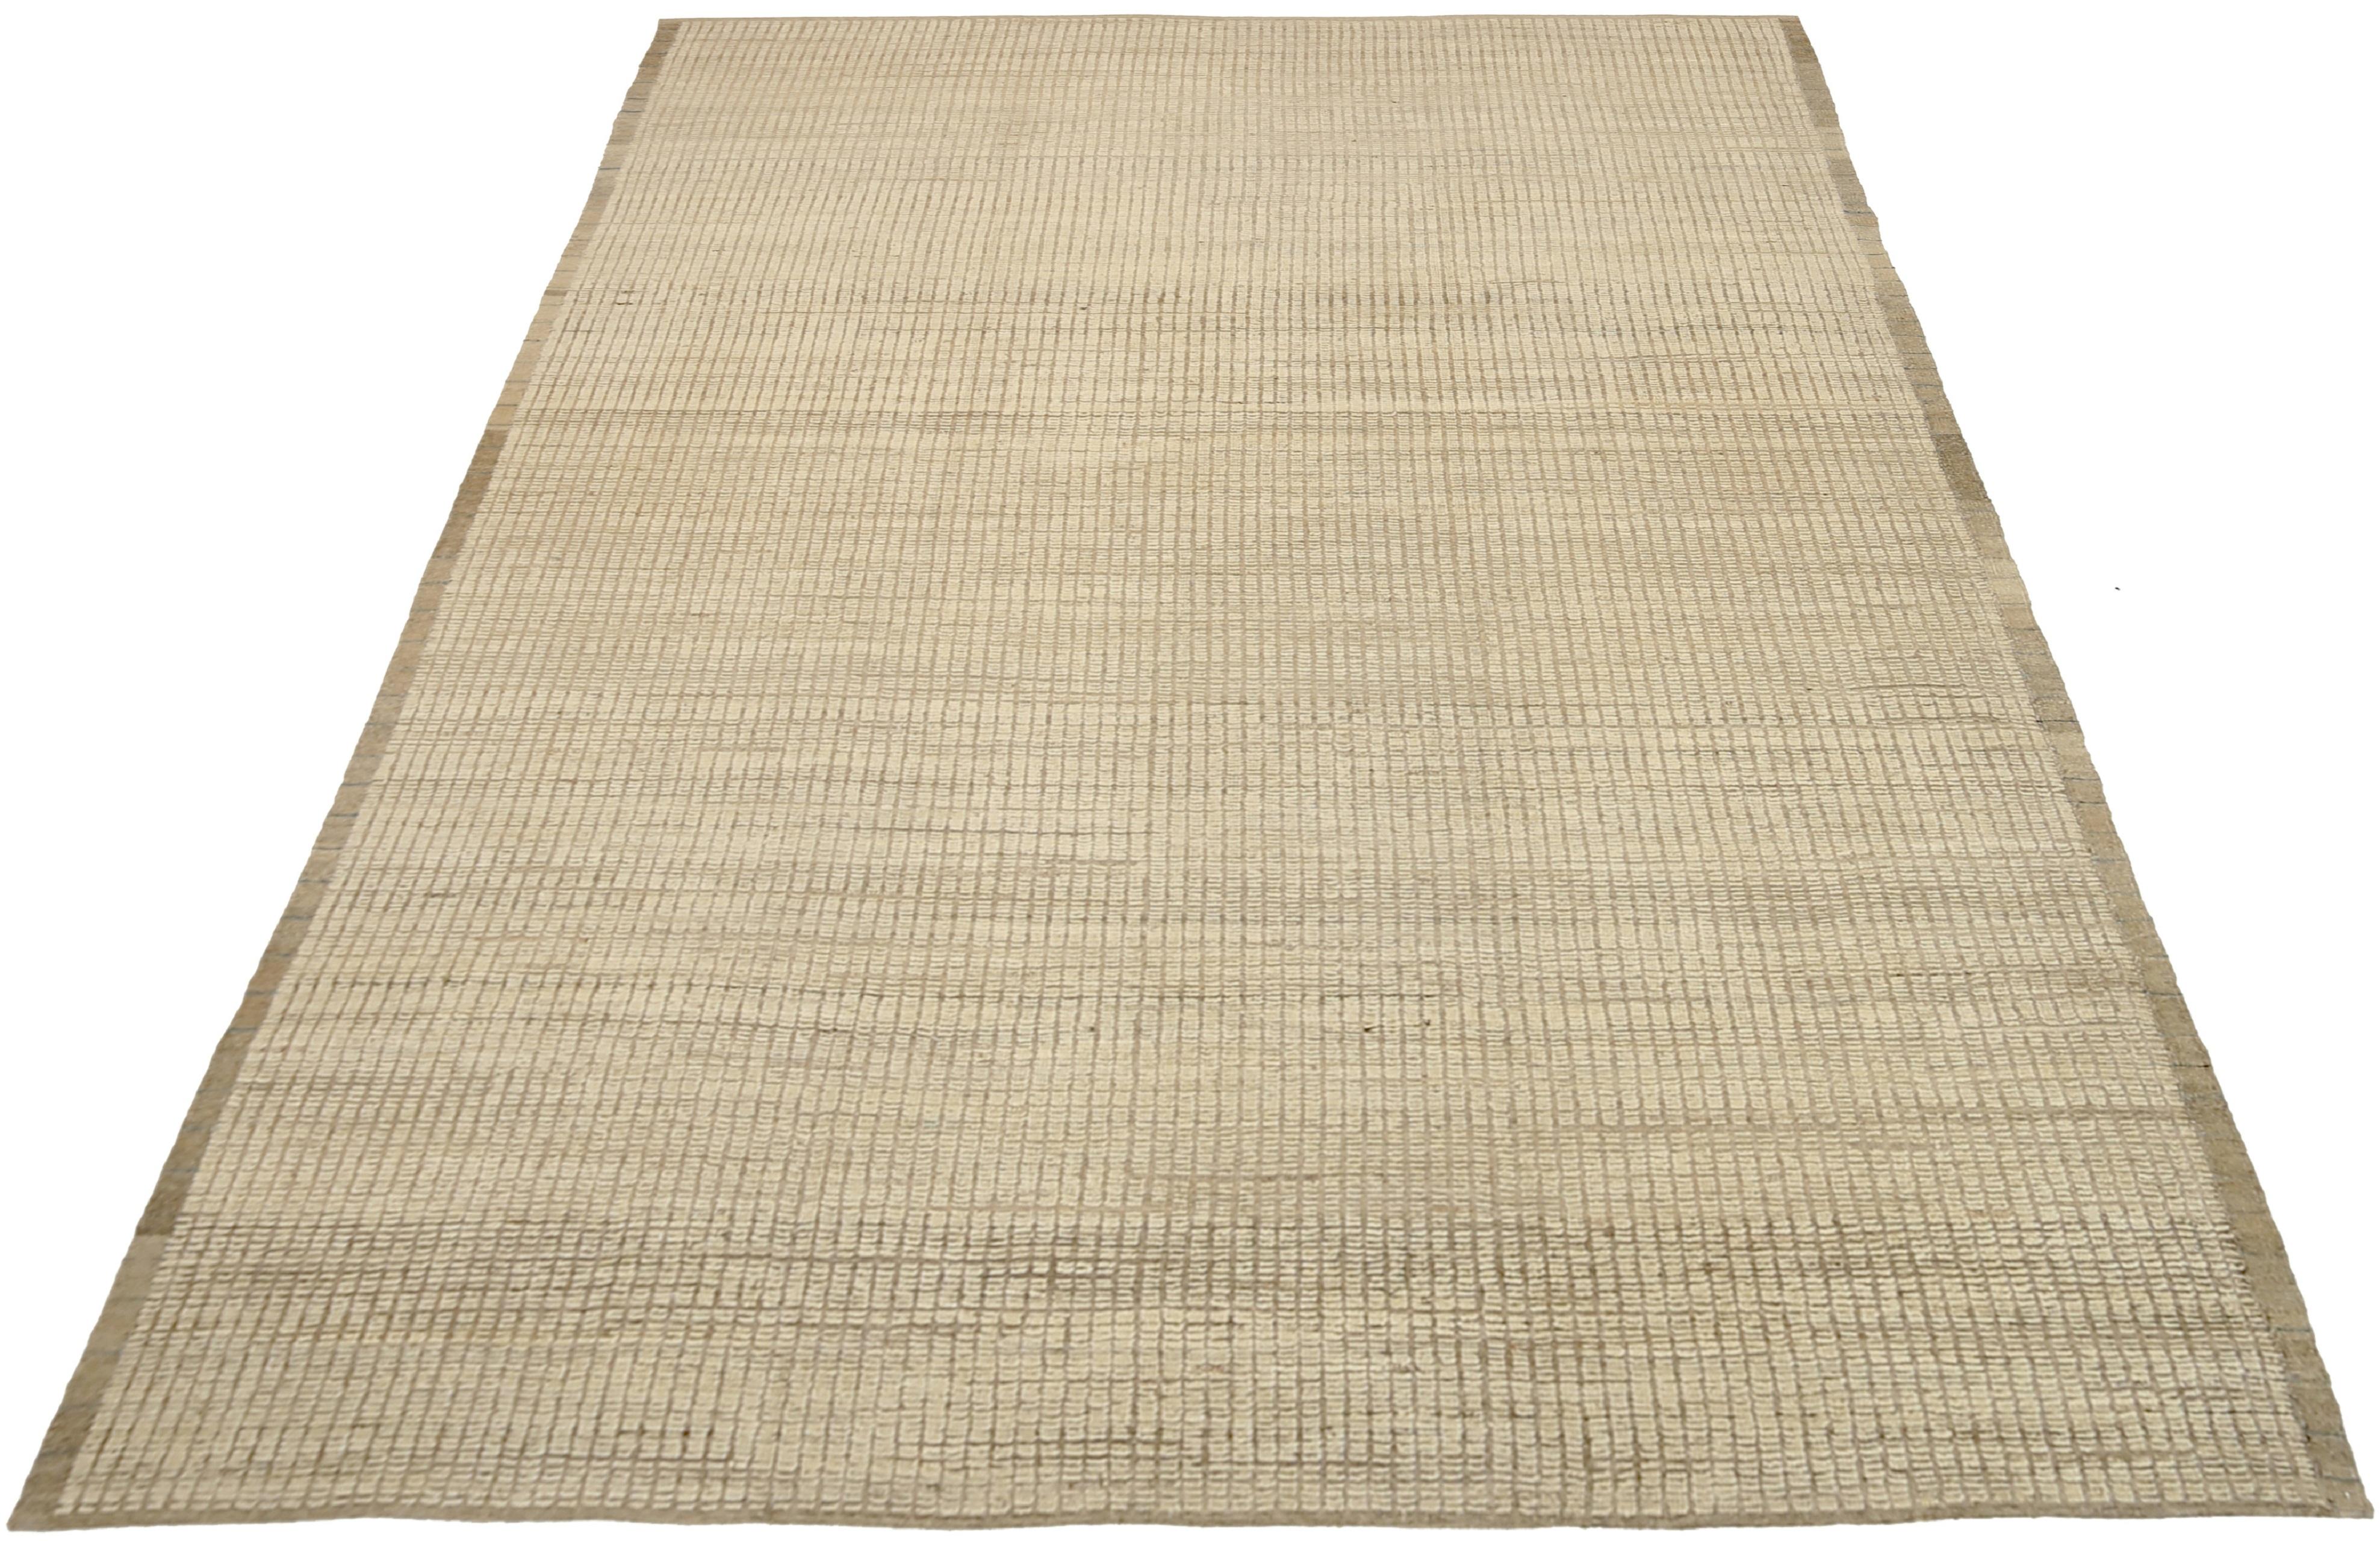 Afghan Nazmiyal Collection Beige Color Modern Distressed Rug. 10 ft 4 in x 13 ft 7 in